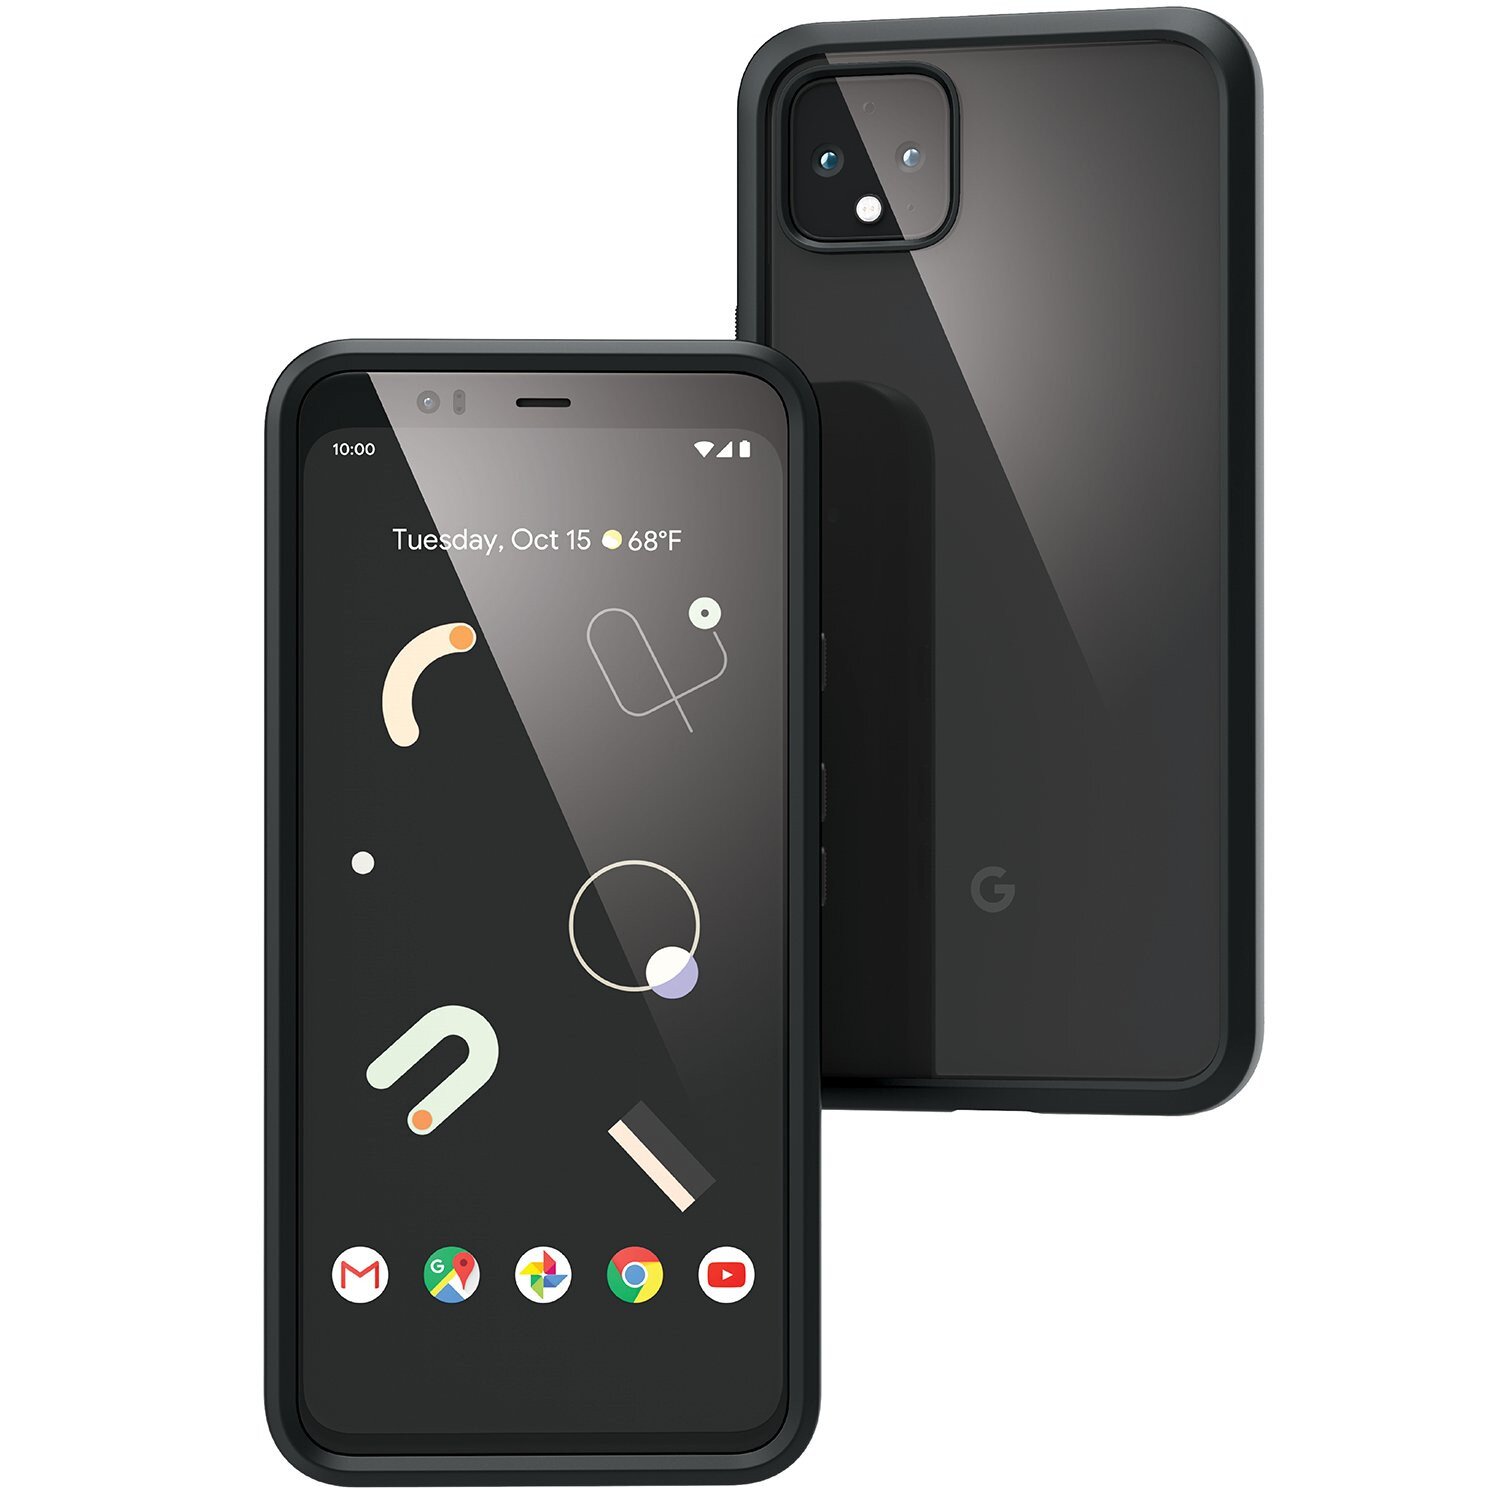 Details On The Release Date And Locations For Google Pixel 4